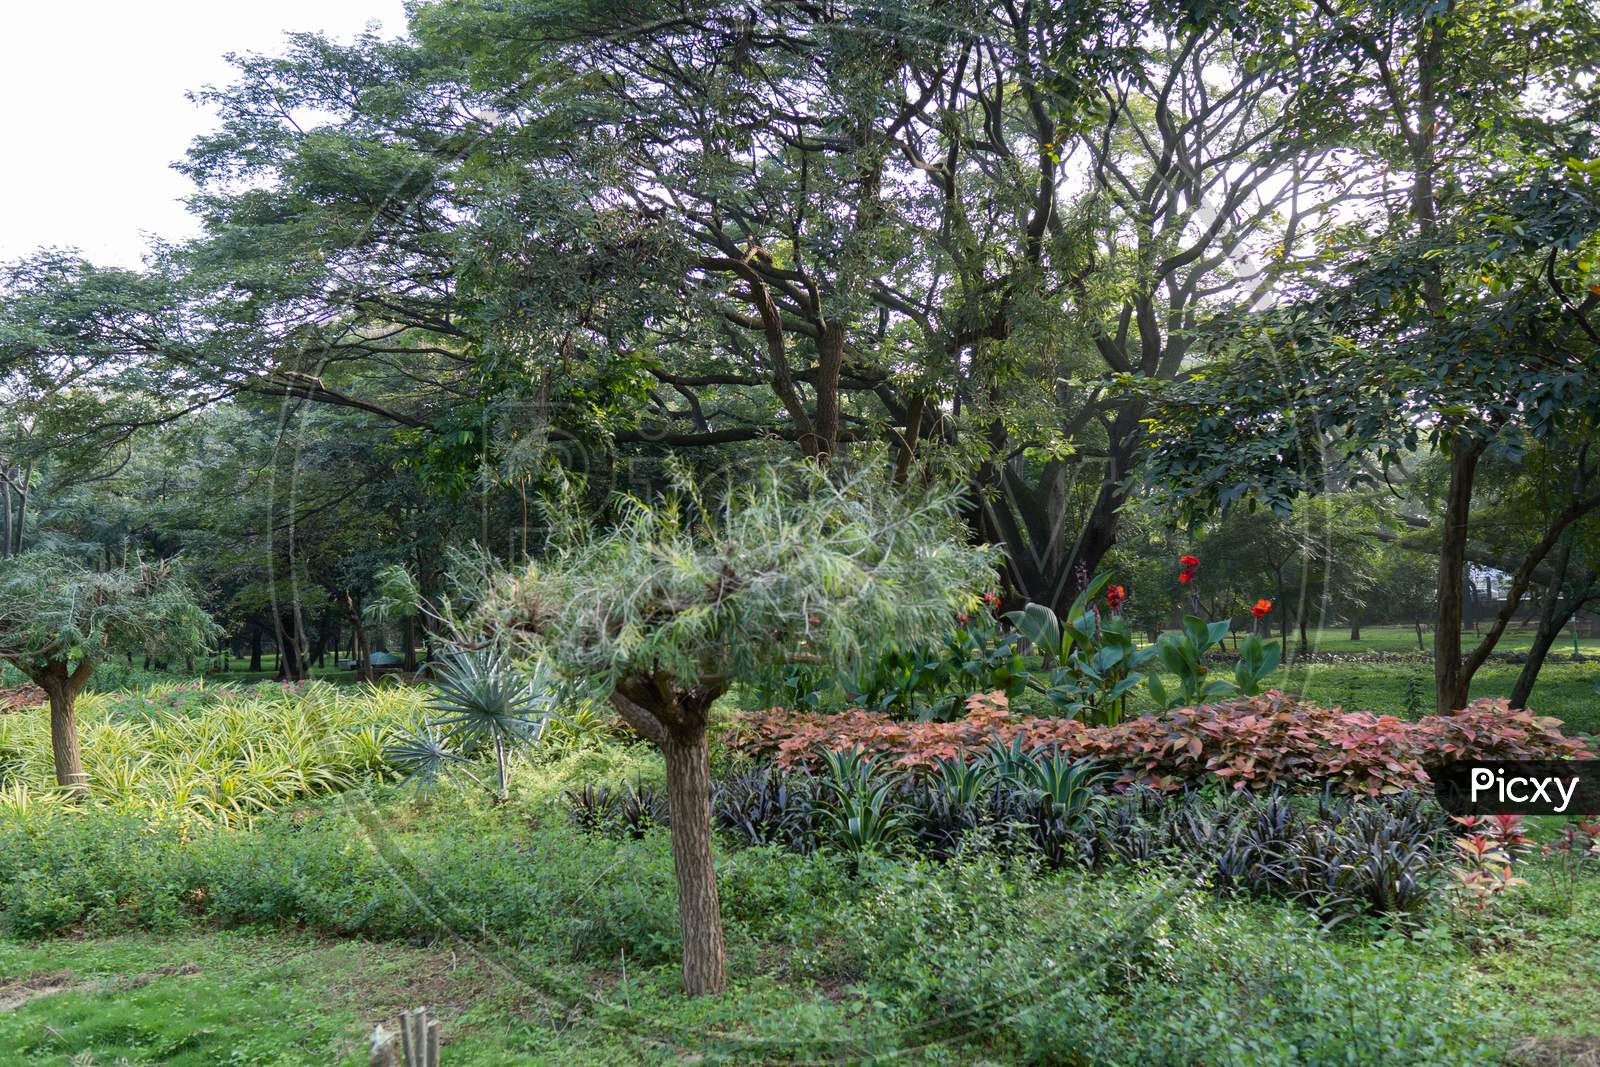 Different Kind Trees And Plants In The Cubbon Park In The Morning